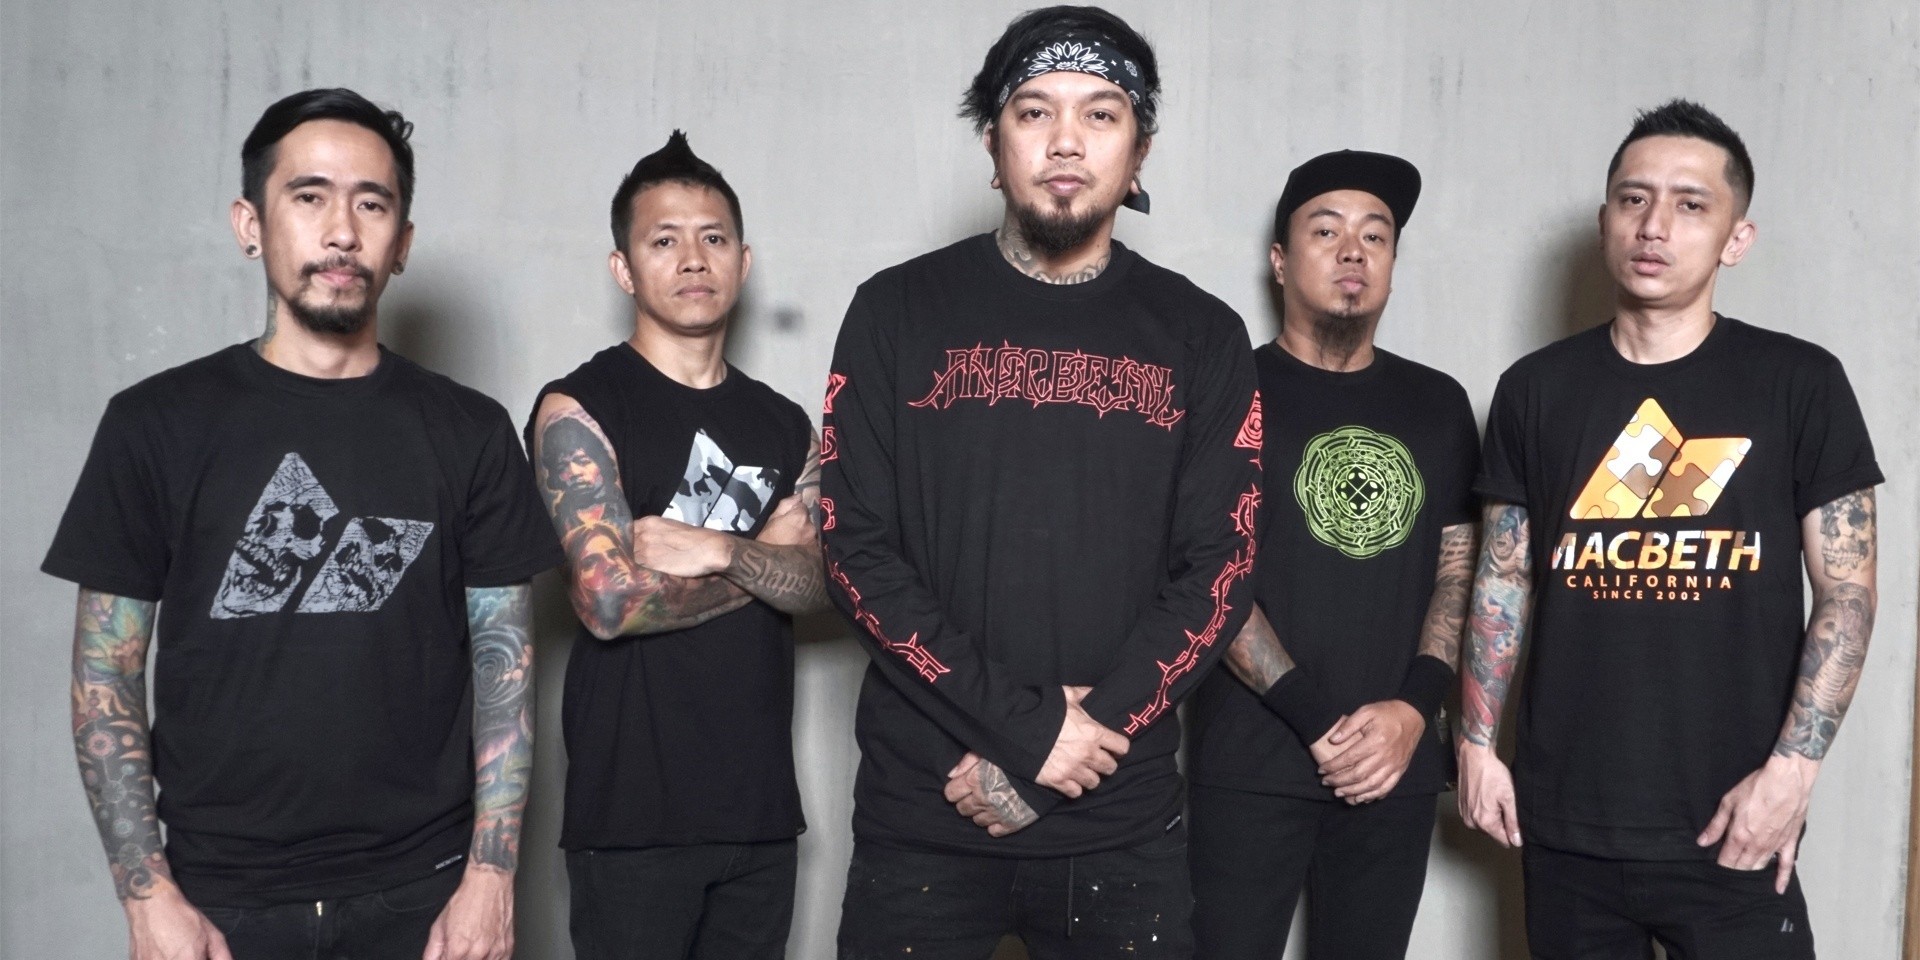 "The Slap Armies have the right to know what really transpired." Bassist confirms "how Slapshock disbanded"